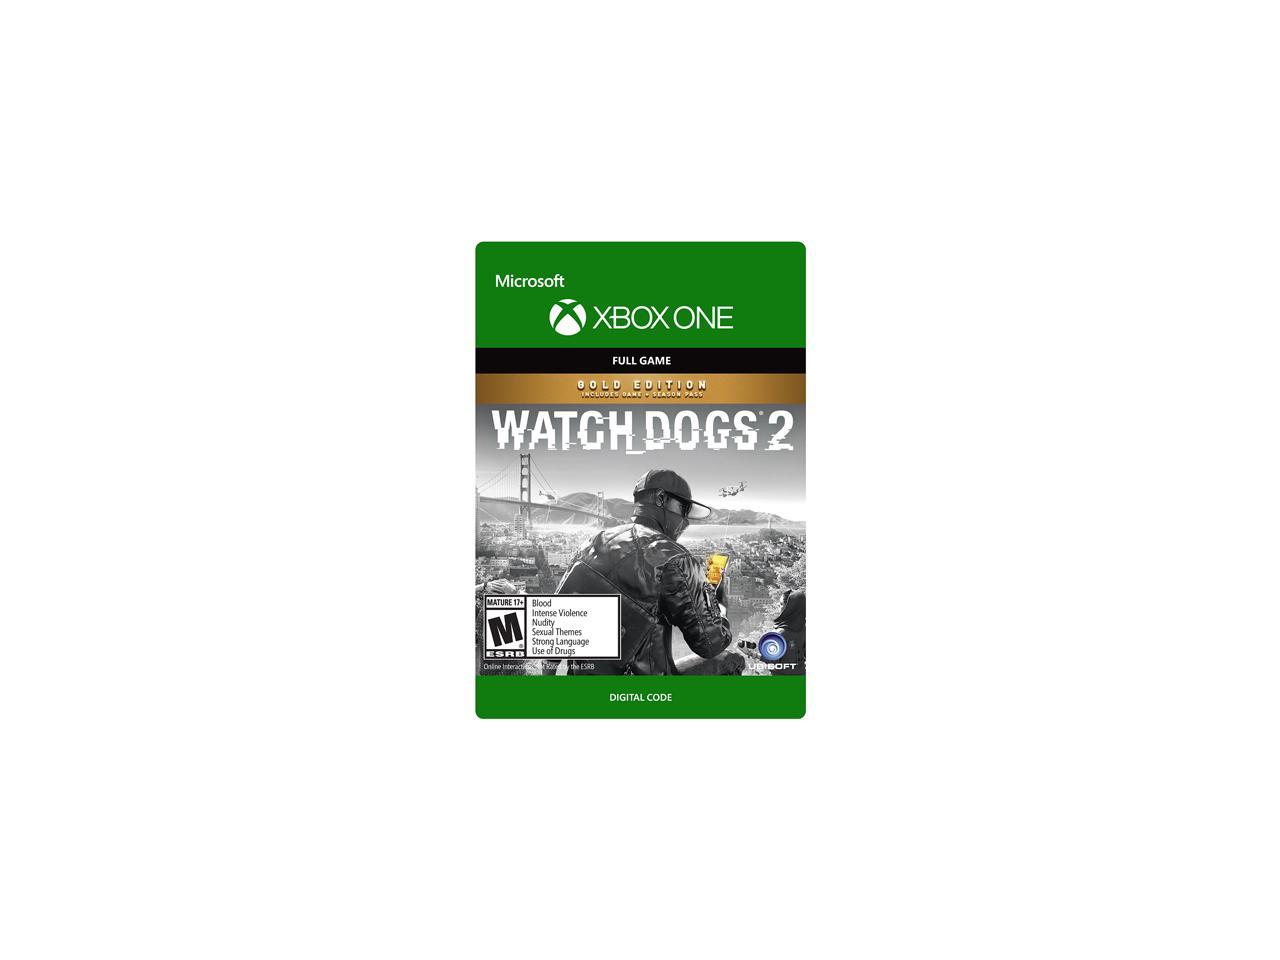 watch dogs 2 download code